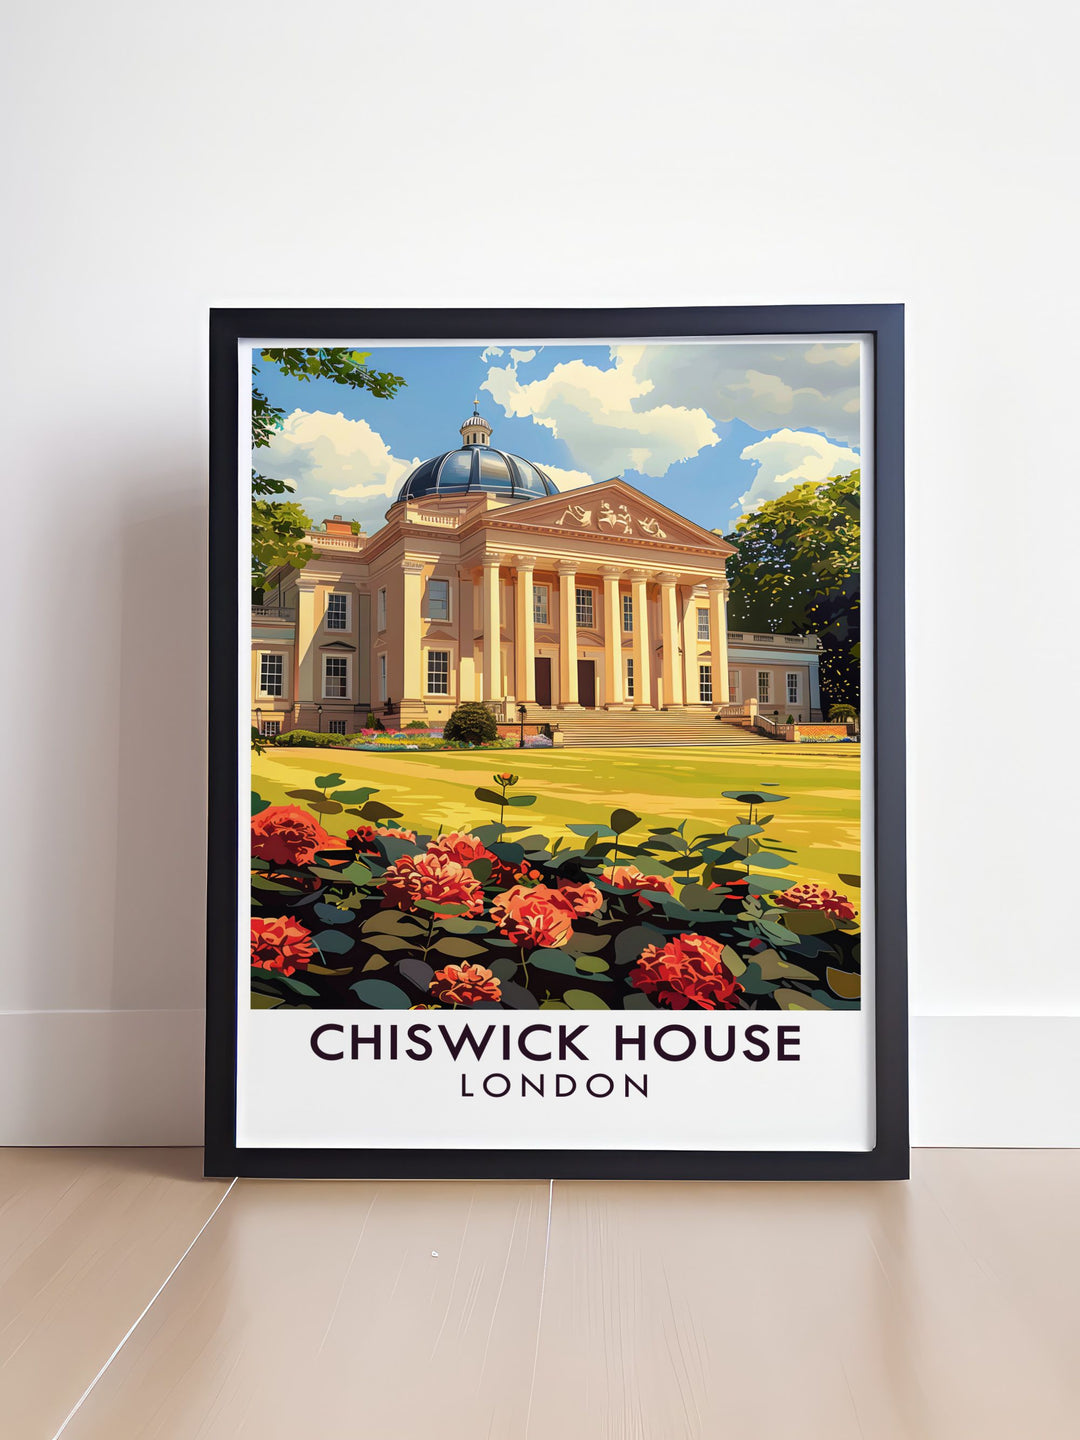 Discover the botanical splendor of Chiswick House Gardens, where hidden groves, charming garden buildings, and serene water features create a picturesque setting.